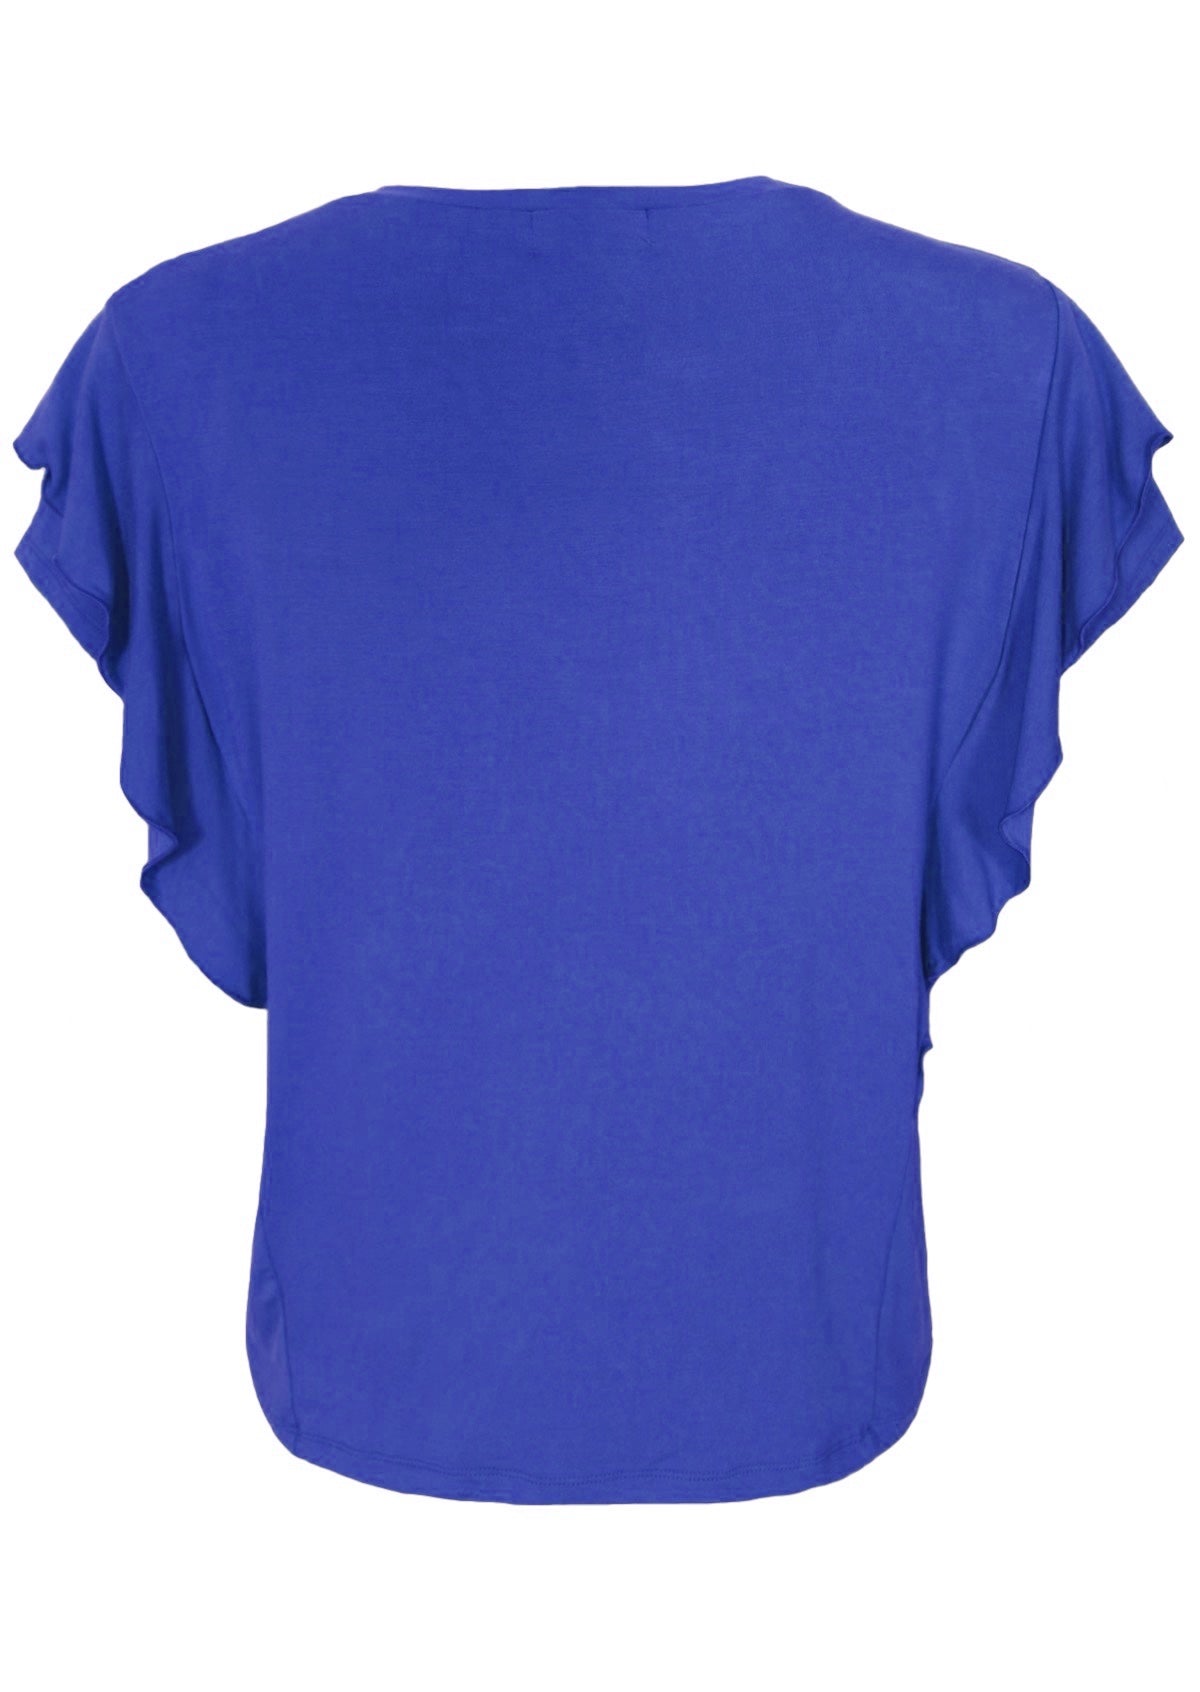 Back view loose fit women's basic ruffle blue top.